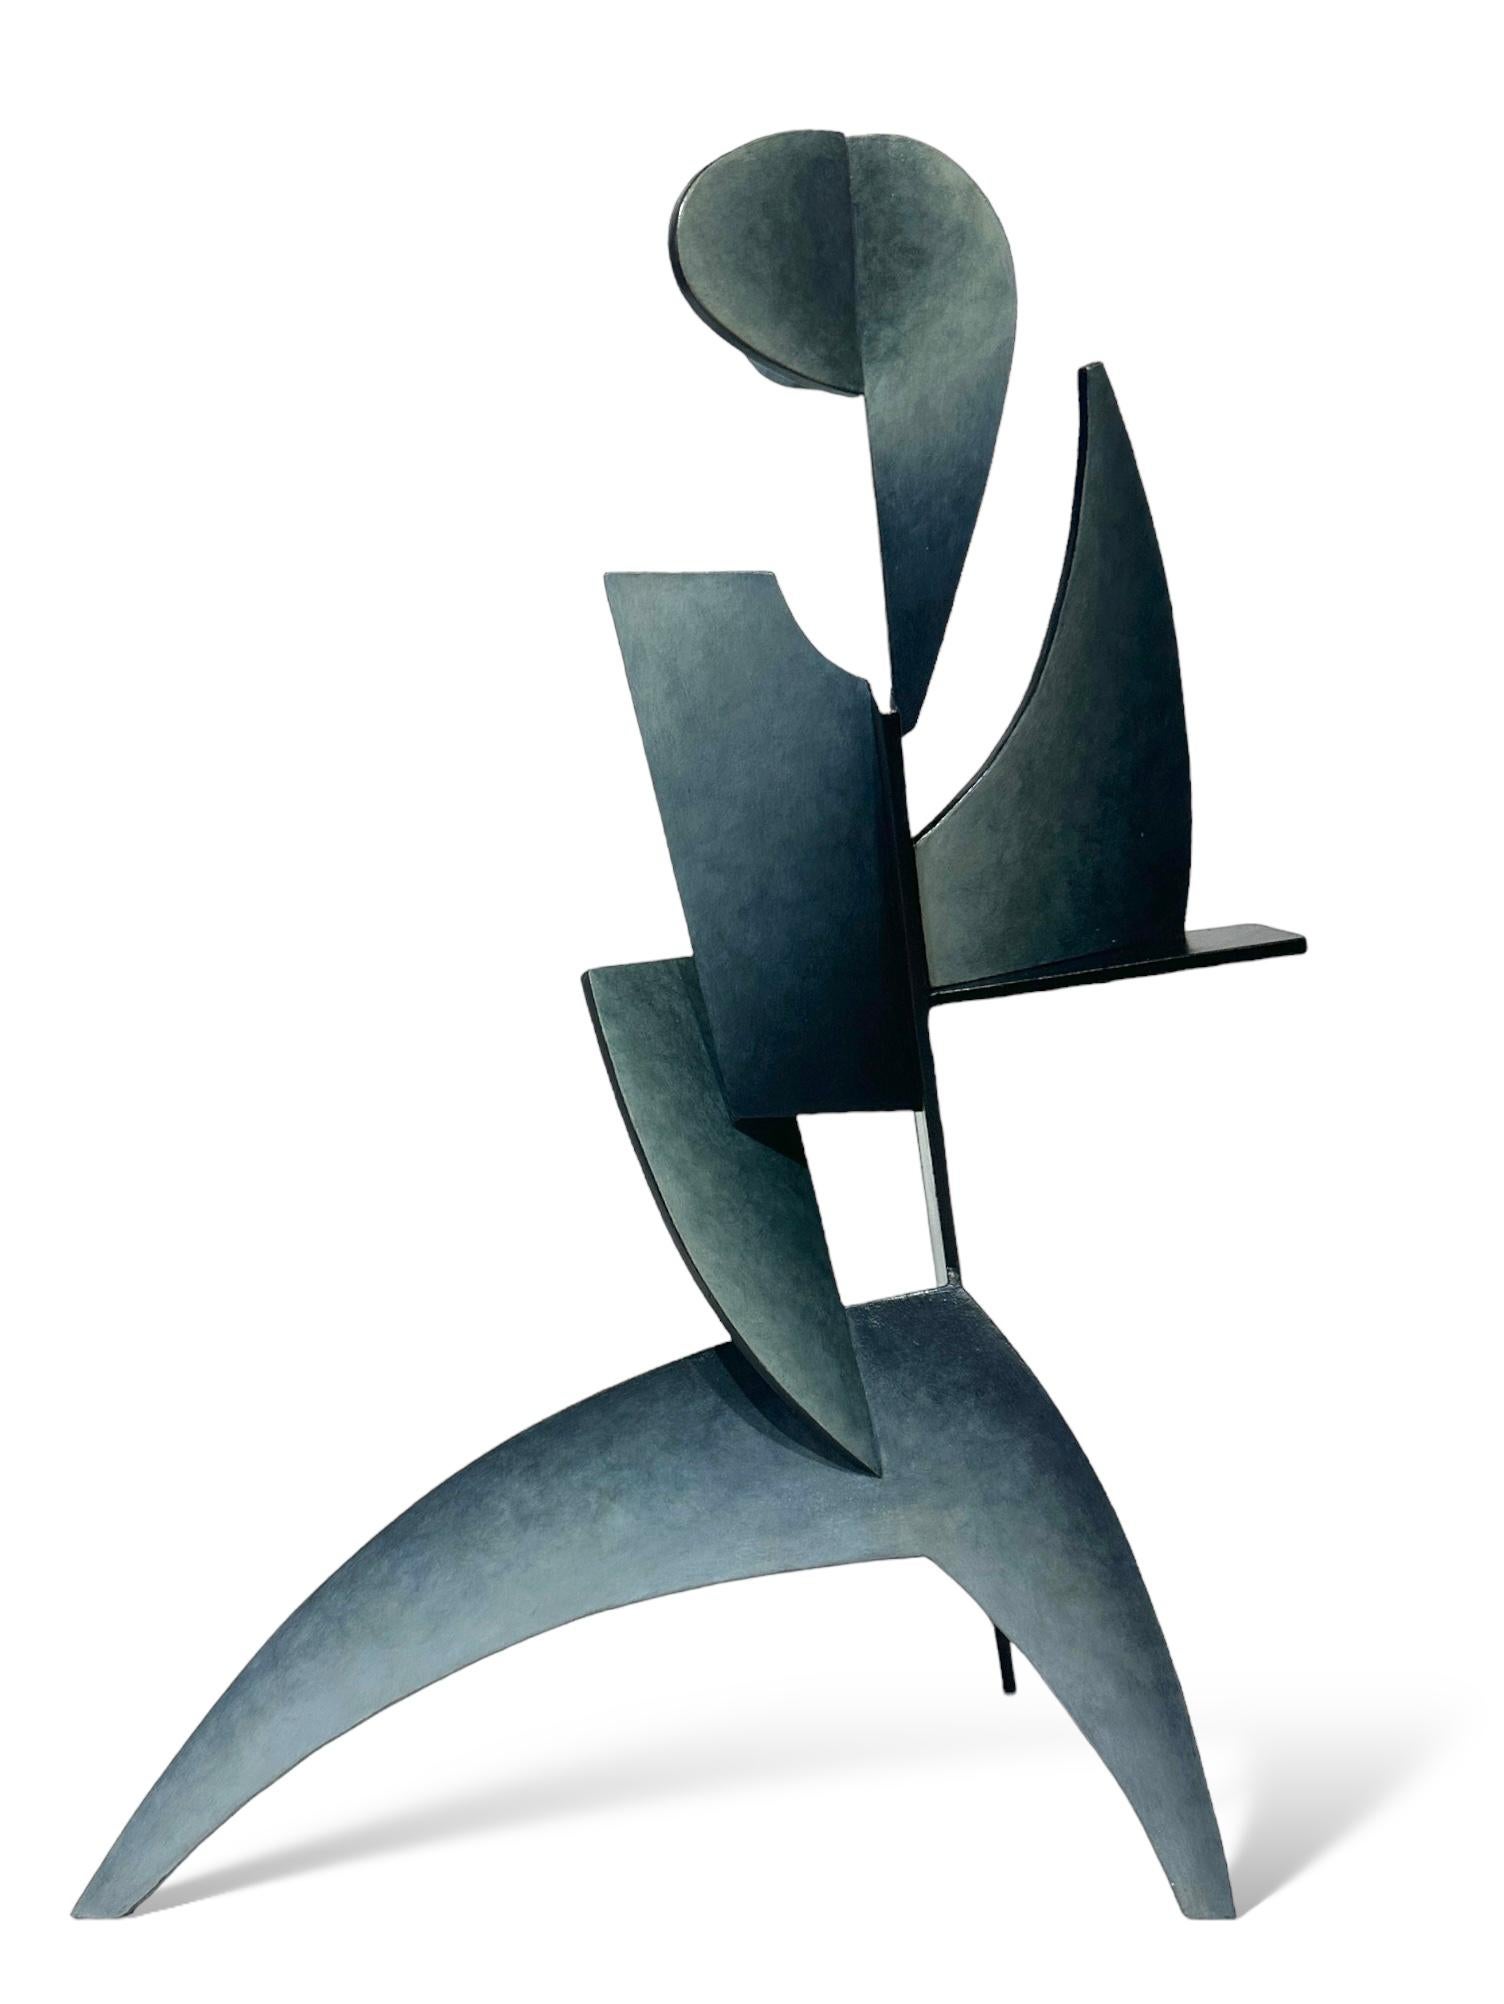 Spirit - Abstract Geometric Form, Hand Painted, Welded Steel Sculpture 